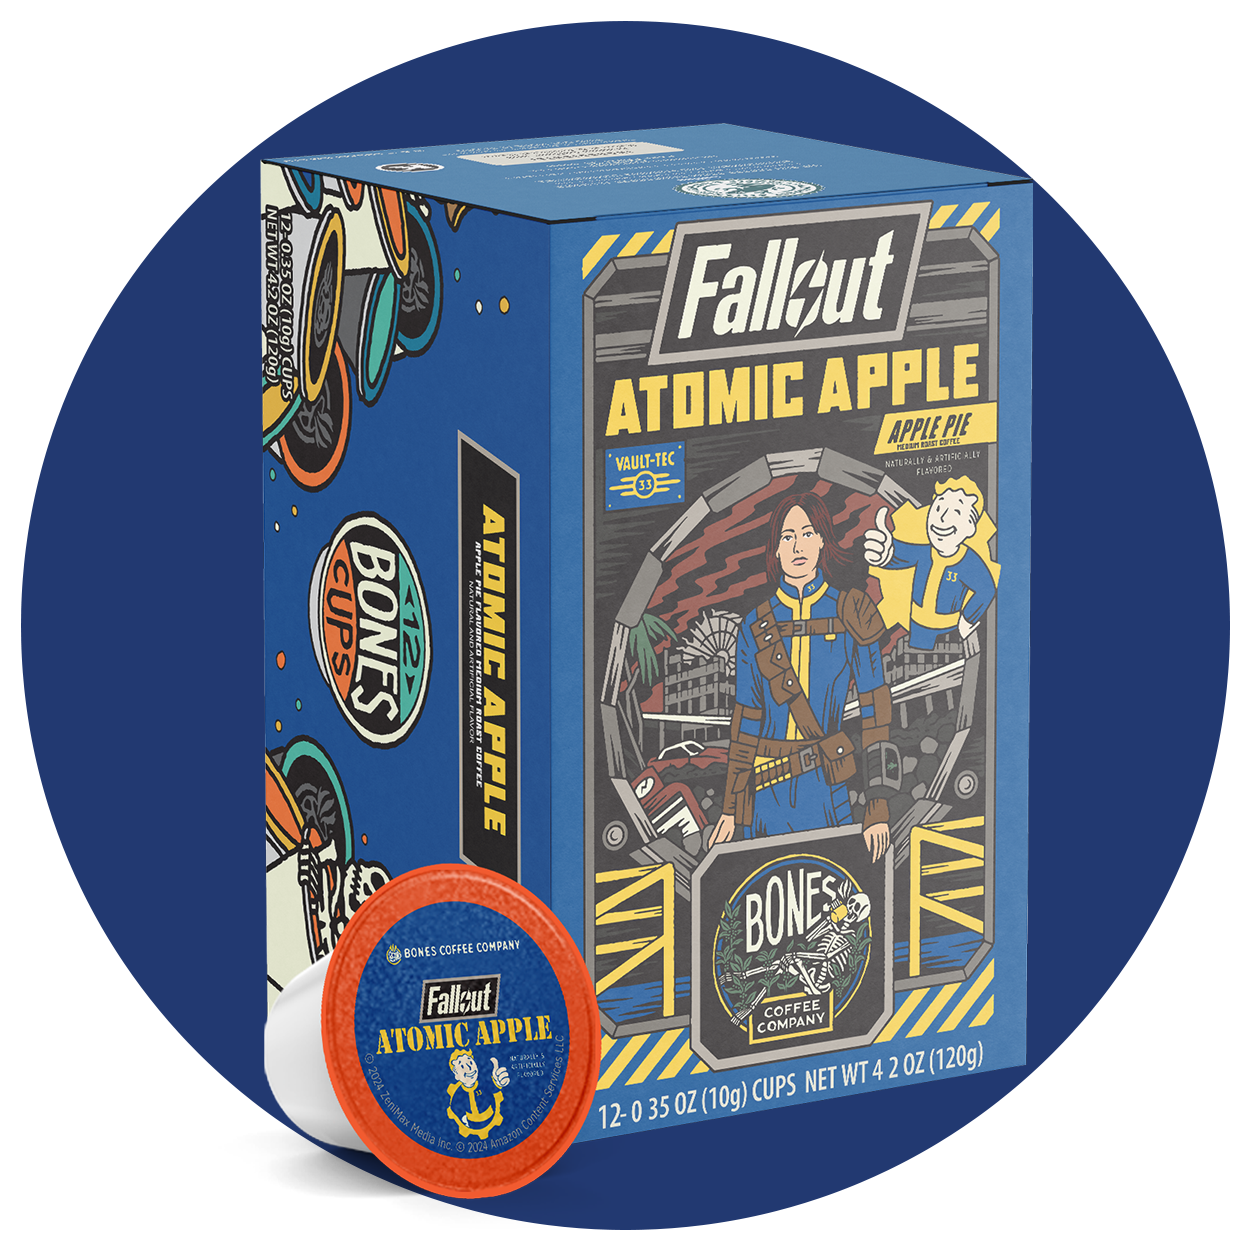 A box of Bones Cups flavored coffee inspired by Fallout named Atomic Apple. Its flavor is apple pie. On the art is Lucy from the Fallout show, and behind the box is a dark blue circle.